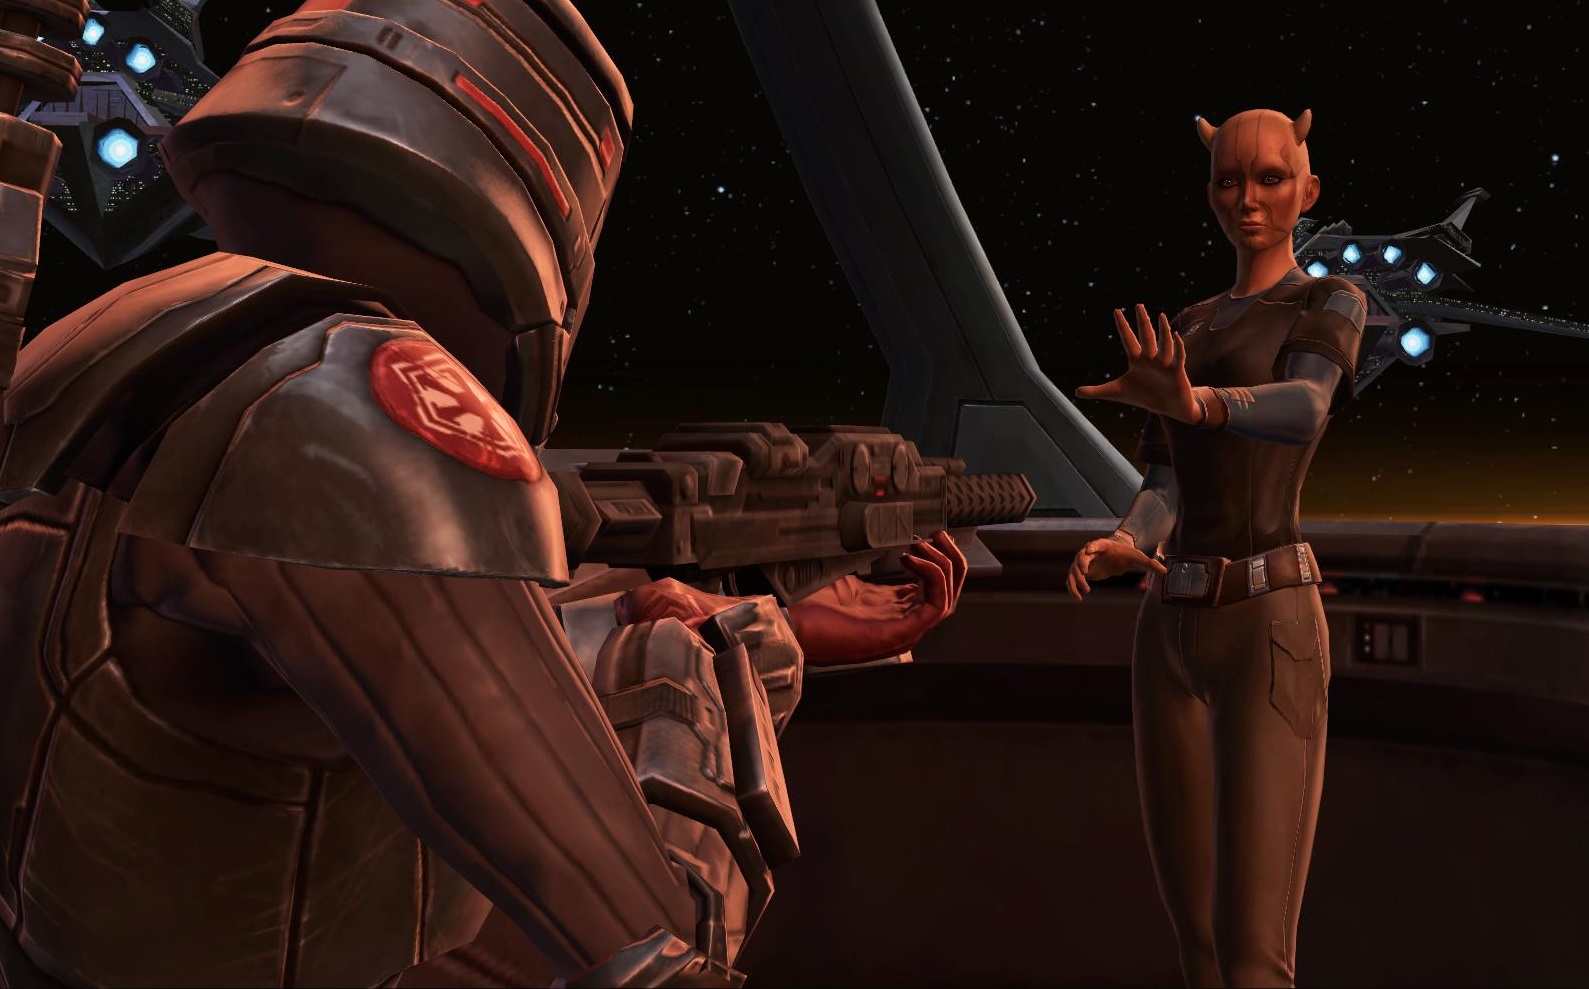 Swtor Images Exciting.